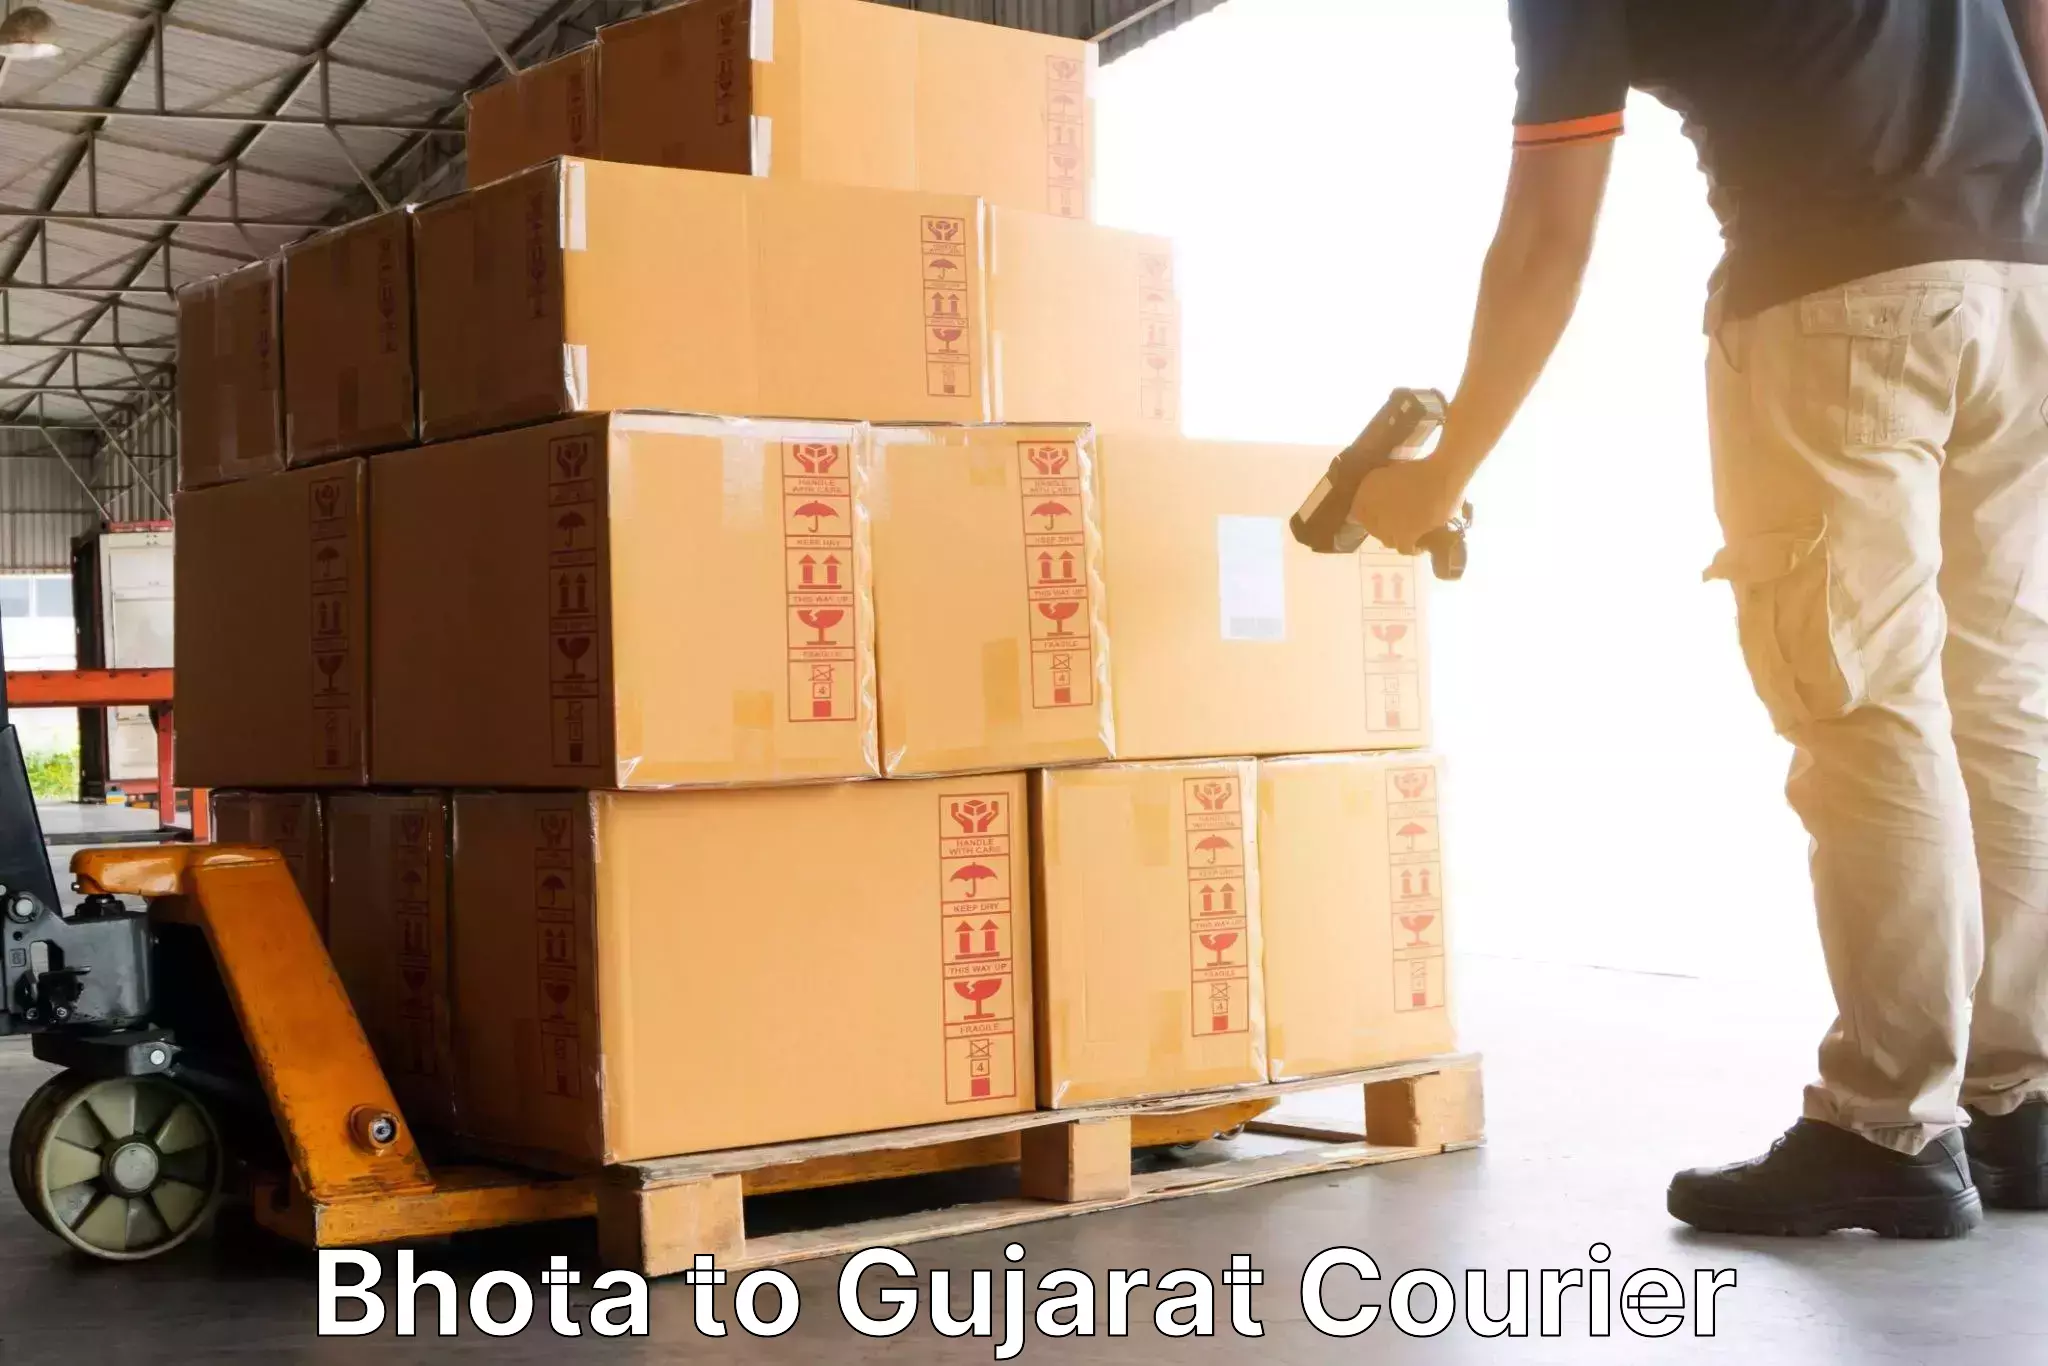 High-priority parcel service Bhota to Sami